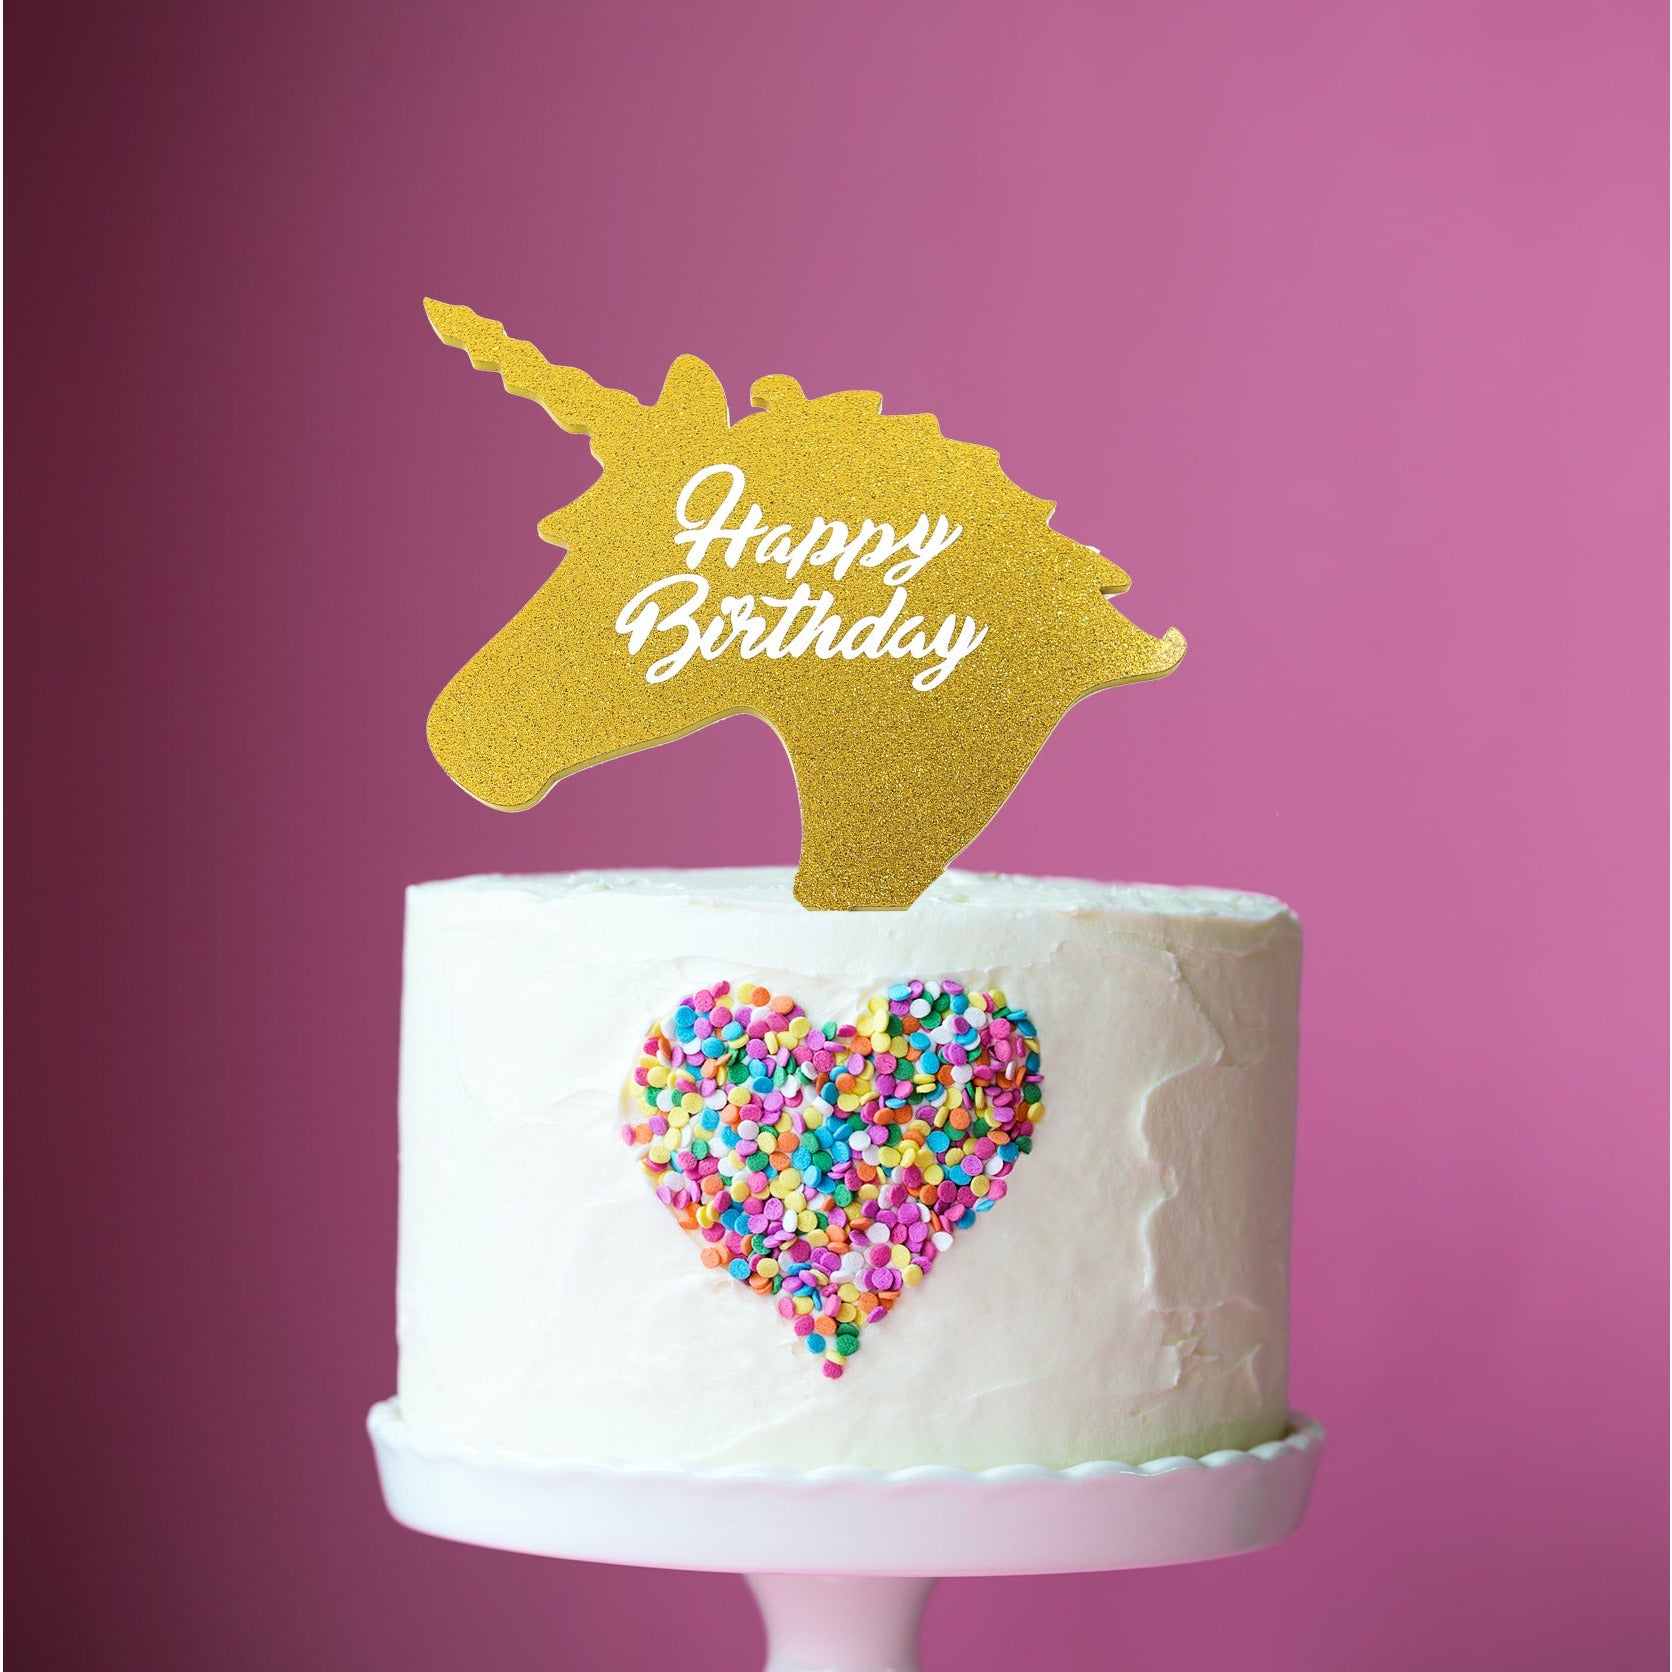 Small Unicorn Cake topper And Cake - Recipes of My Art %